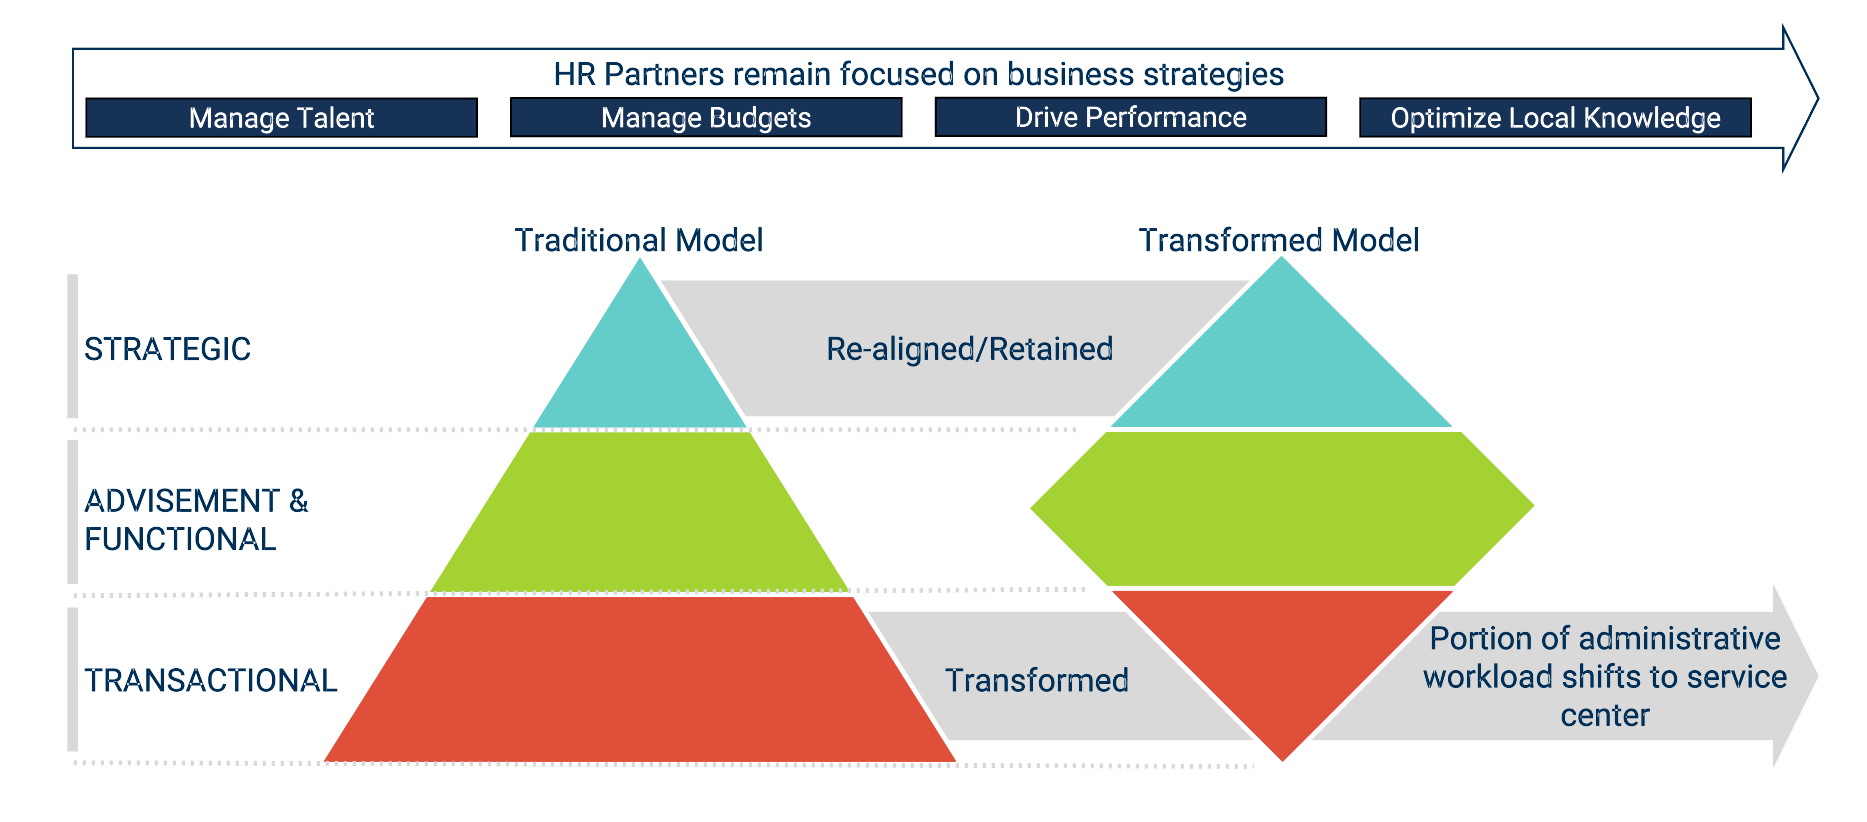 HRBP and business strategy